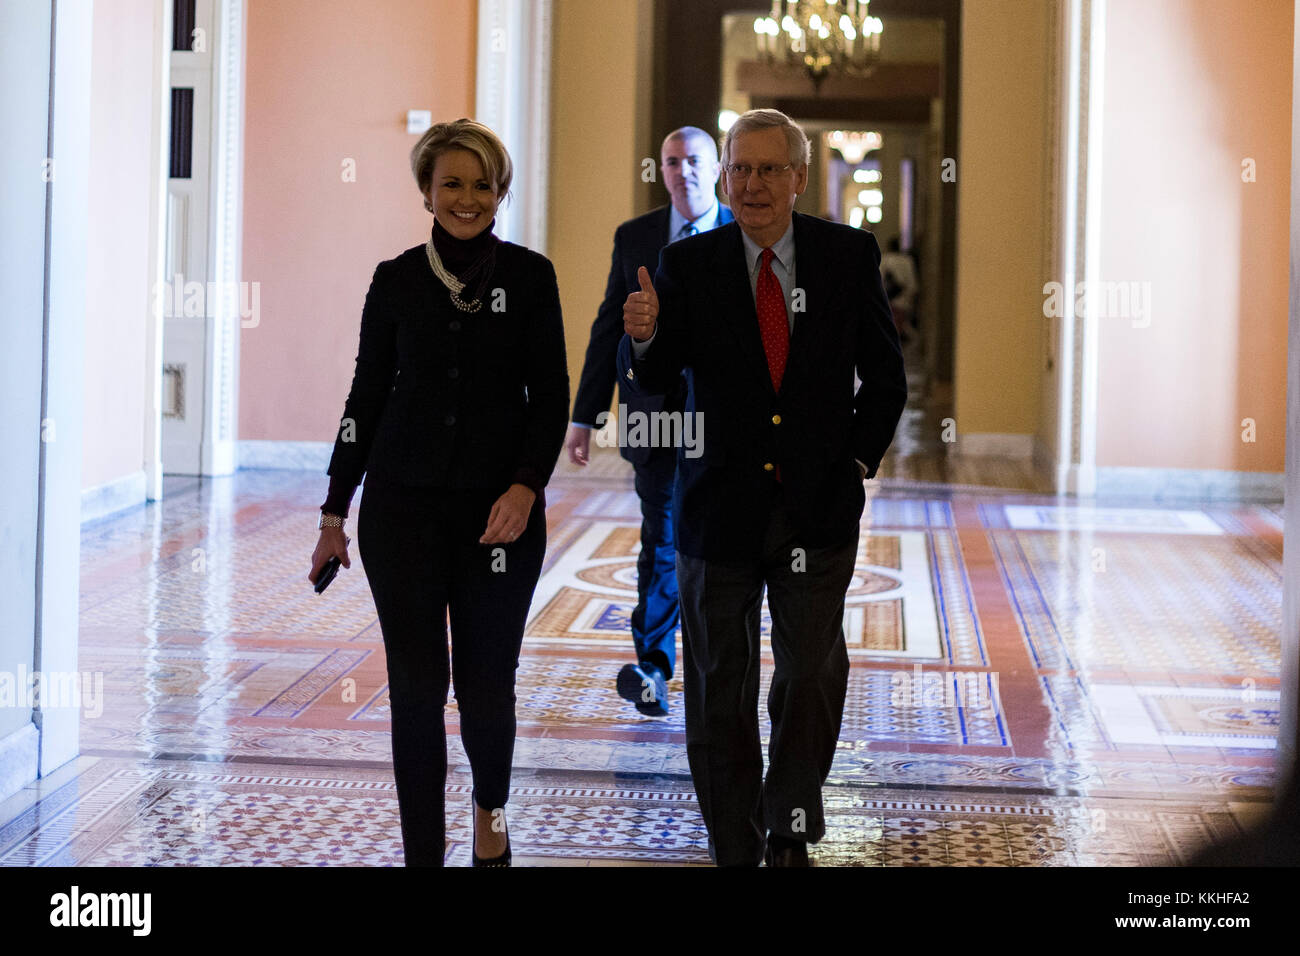 United States Senate Majority Leader Mitch McConnell (Republican of Kentucky) gives a thumbs up as he walks with a staffer from his office to the Senate chamber for a procedural vote to move forward with voting on the Republican proposed tax reform bill at the United States Capitol in Washington, DC on Friday, December 1, 2017. Credit: Alex Edelman/CNP /MediaPunch Stock Photo